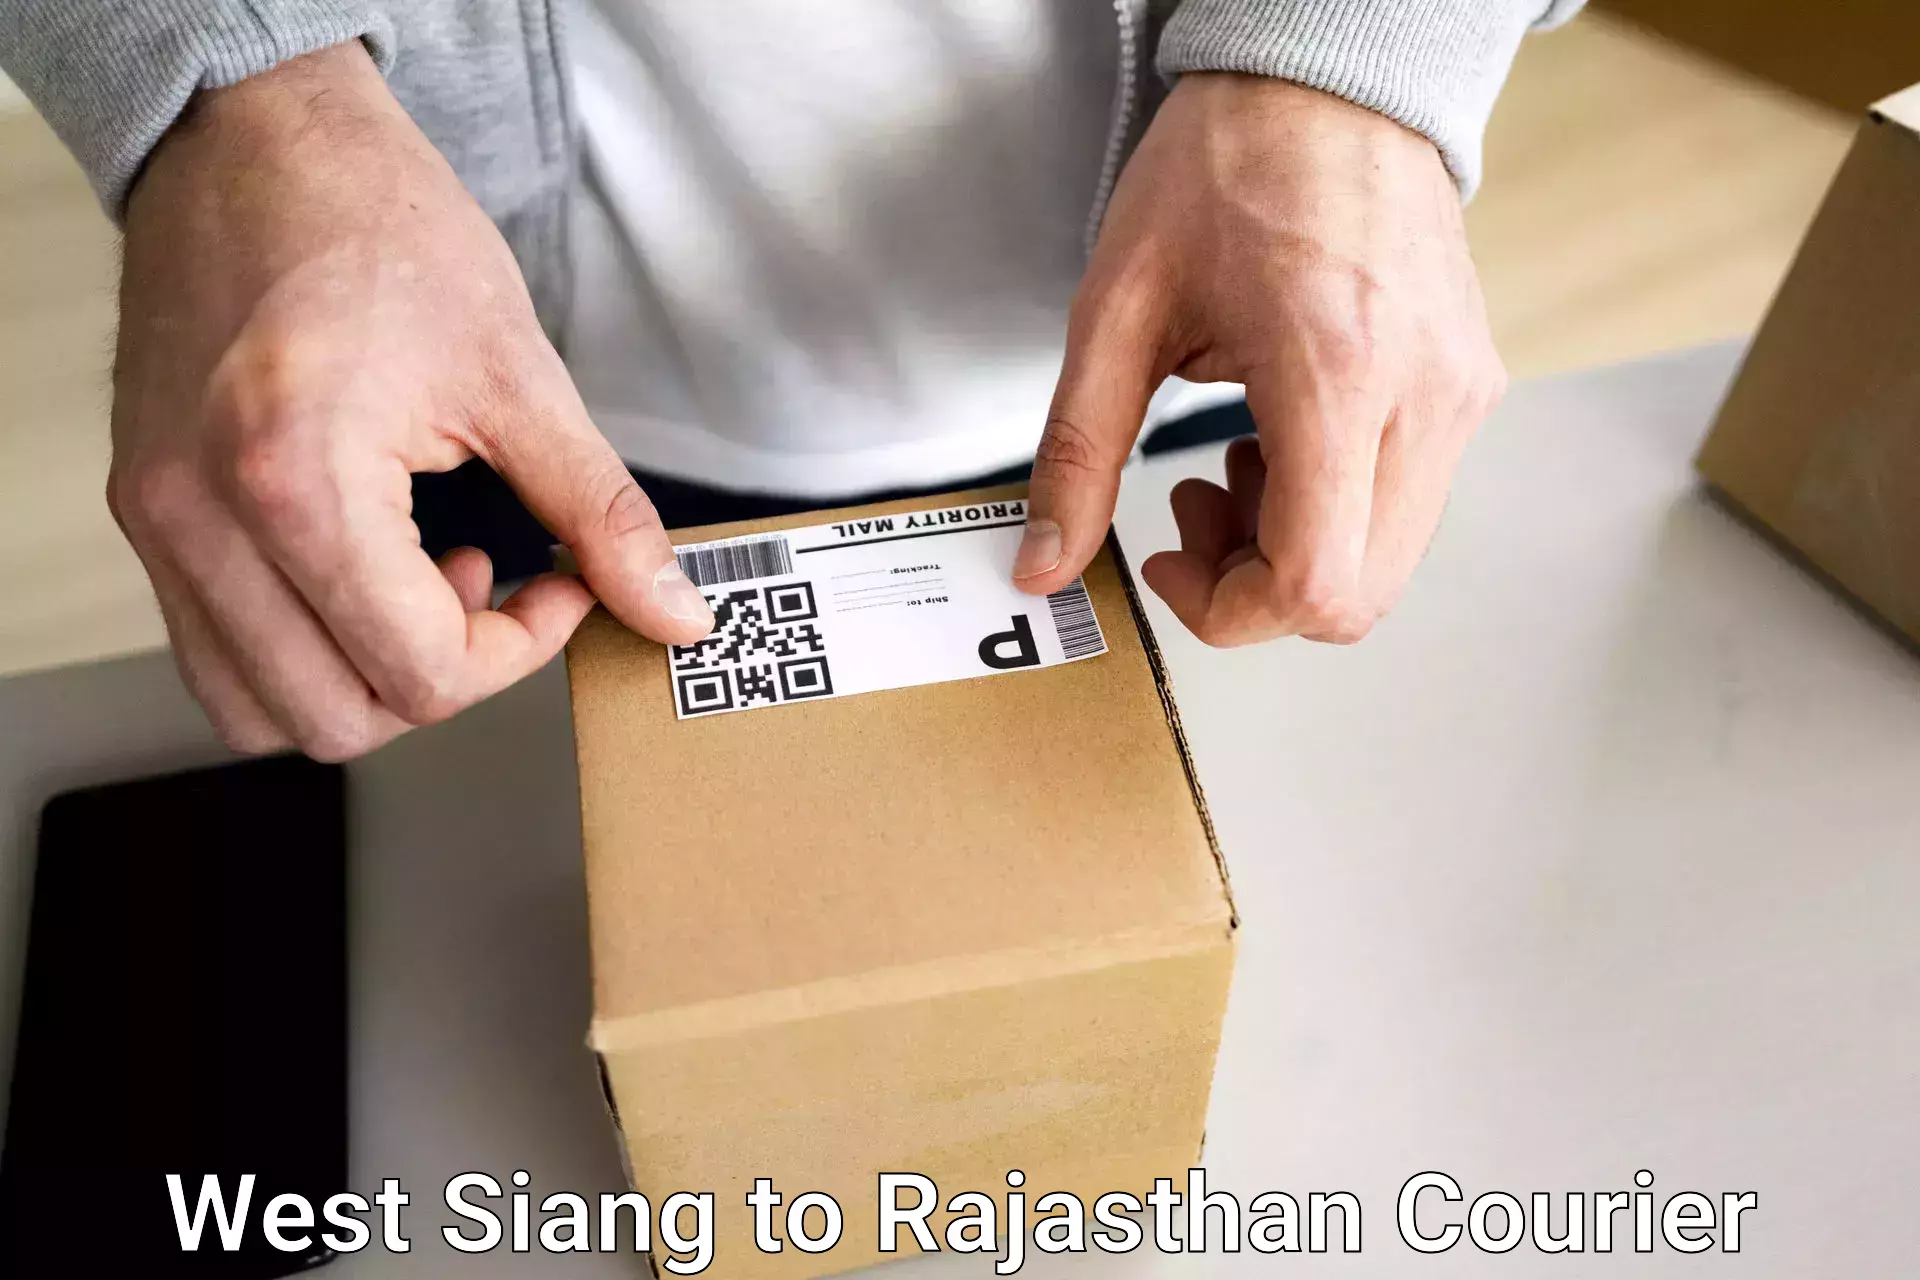 Luggage shipment tracking in West Siang to Rajasthan